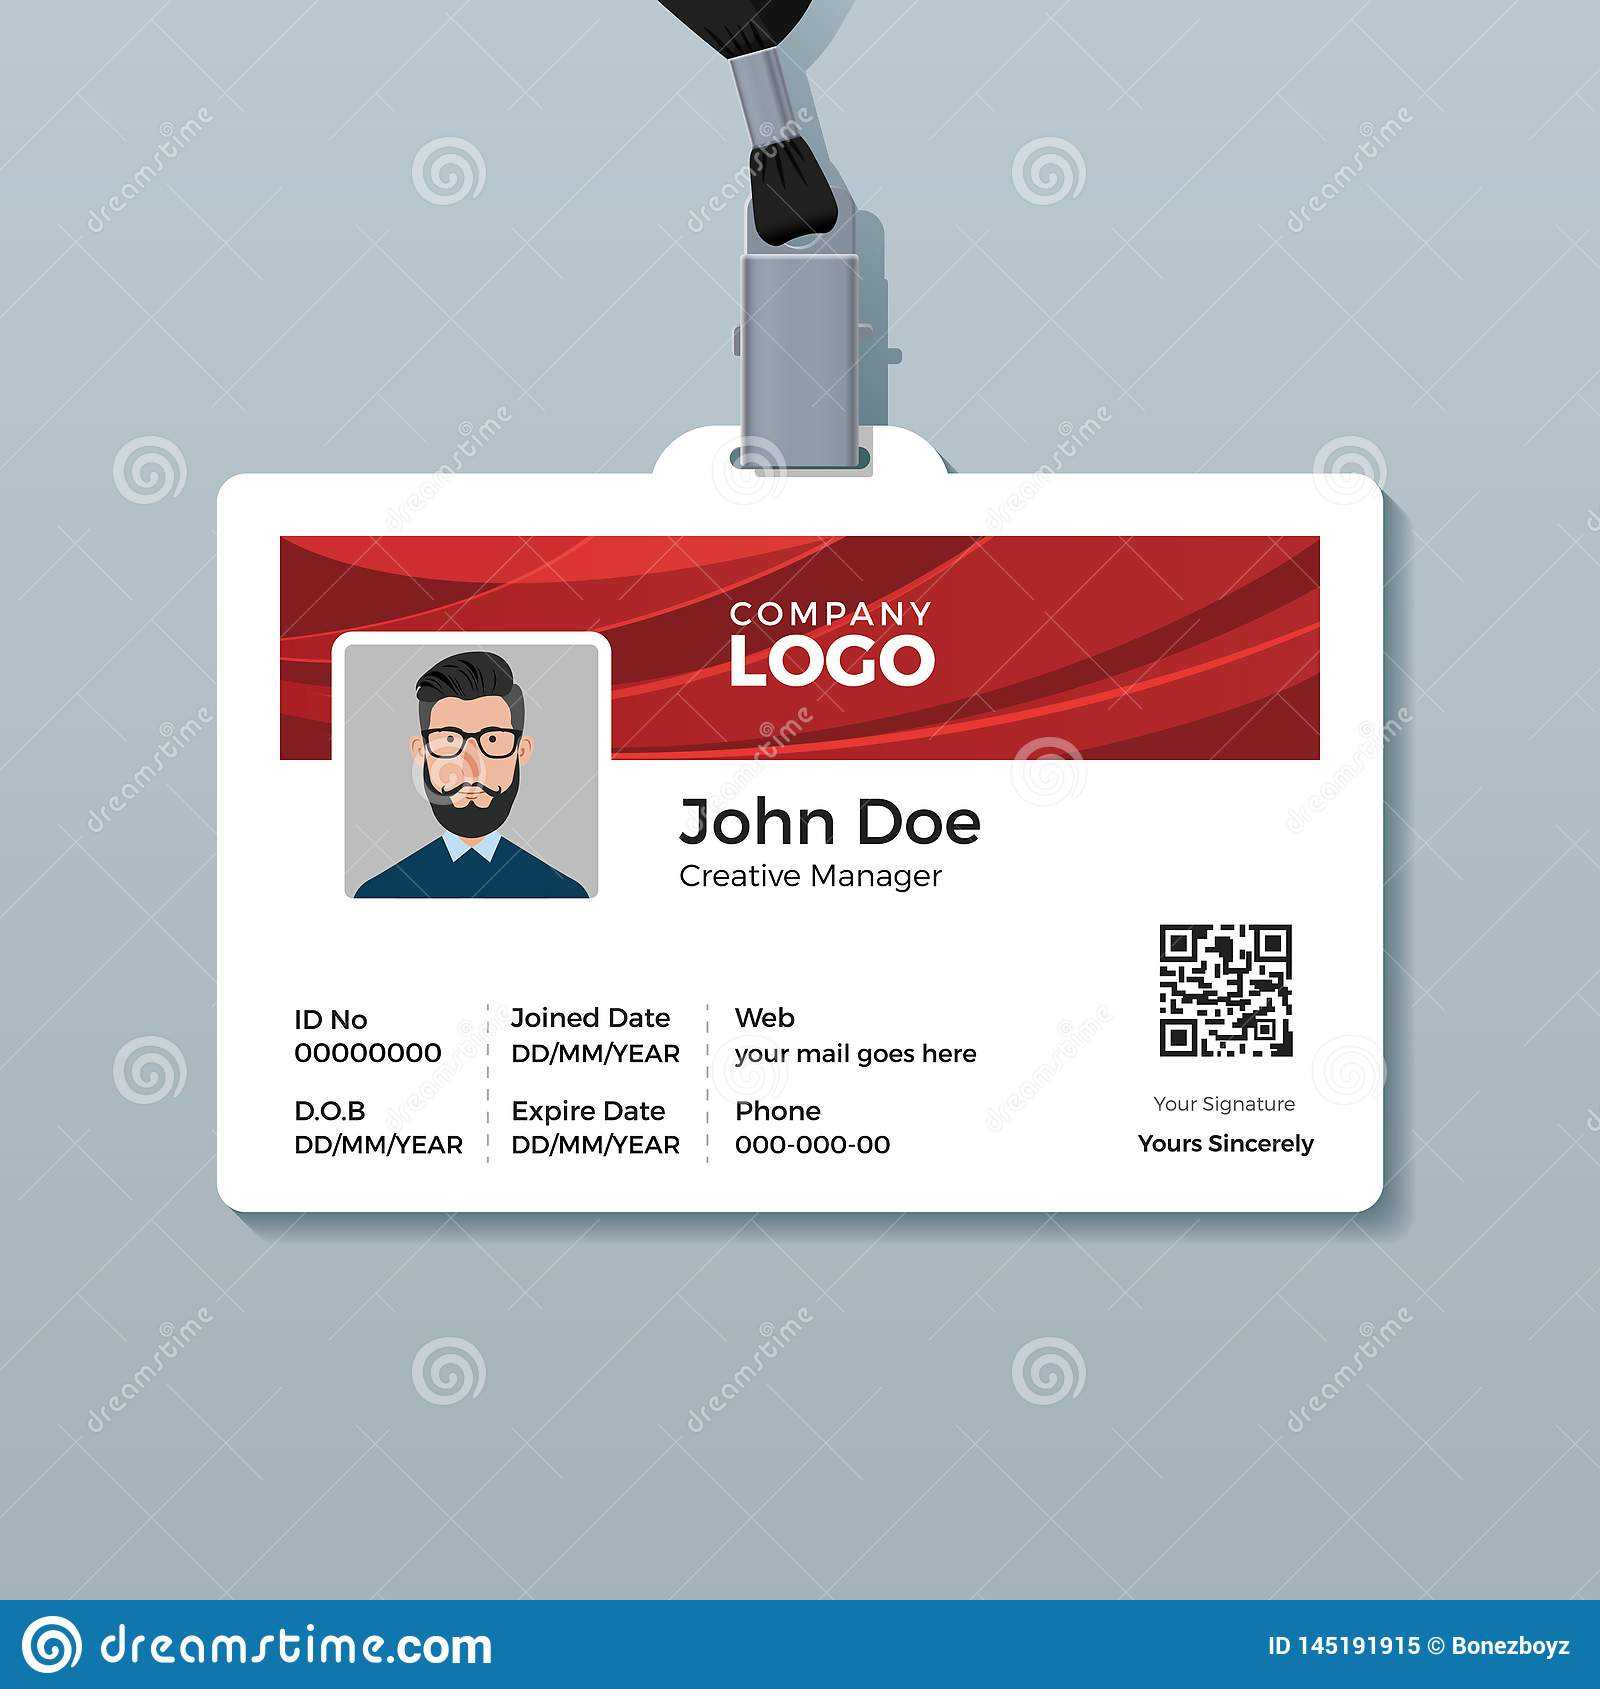 Corporate Id Card Template With Red Curve Background Stock Throughout Template For Id Card Free Download